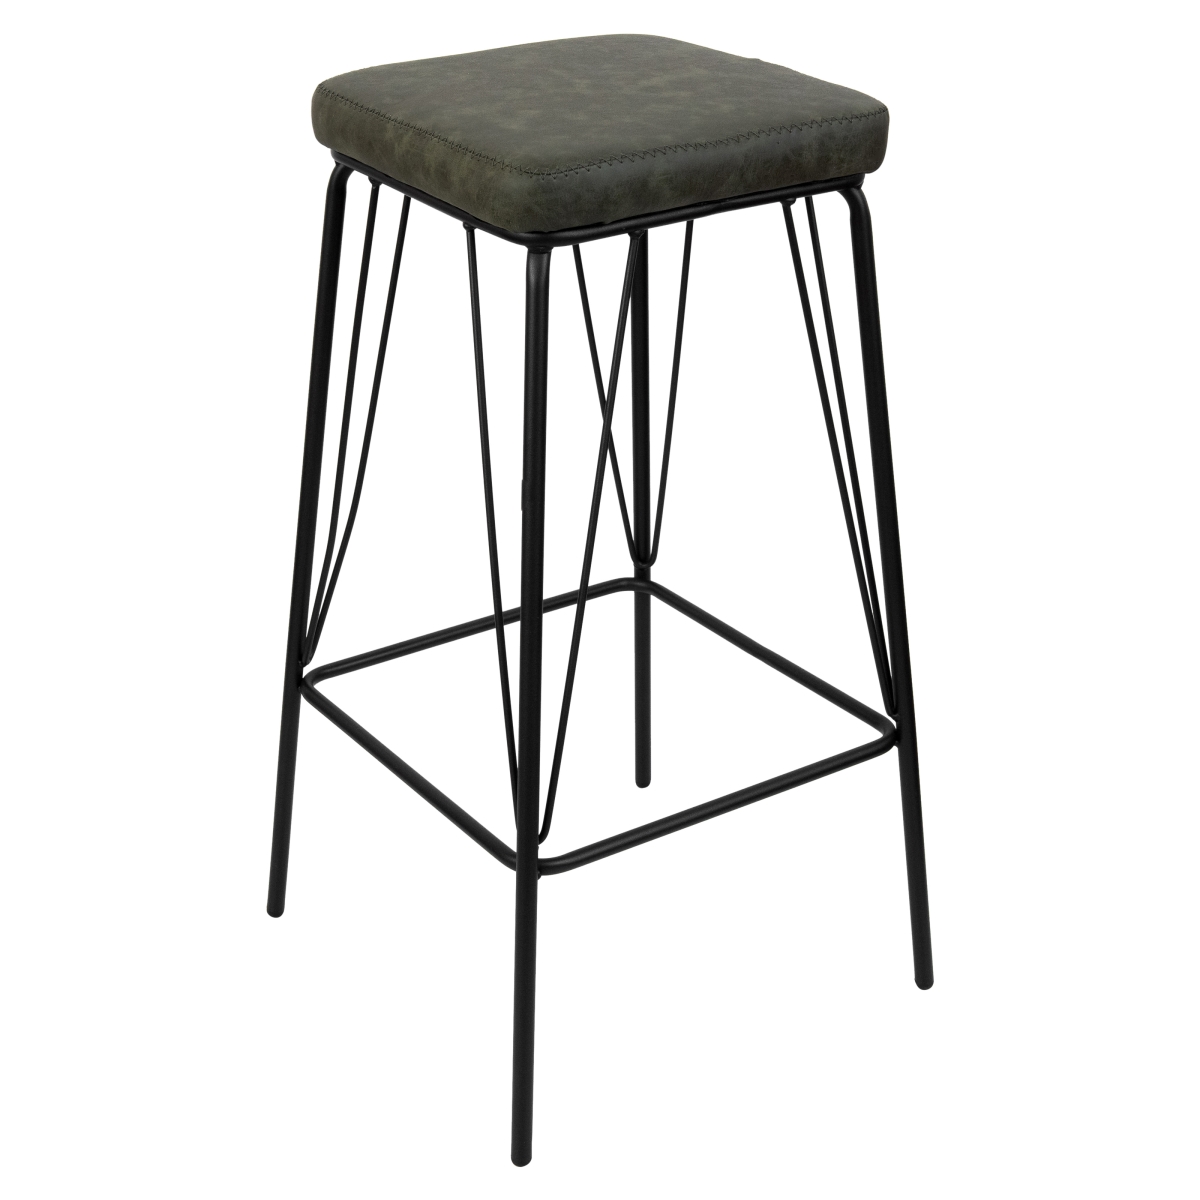 Picture of LeisureMod MS36G 30 x 17 x 17 in. Millard Leather Bar Stool with Metal Frame, Olive Green